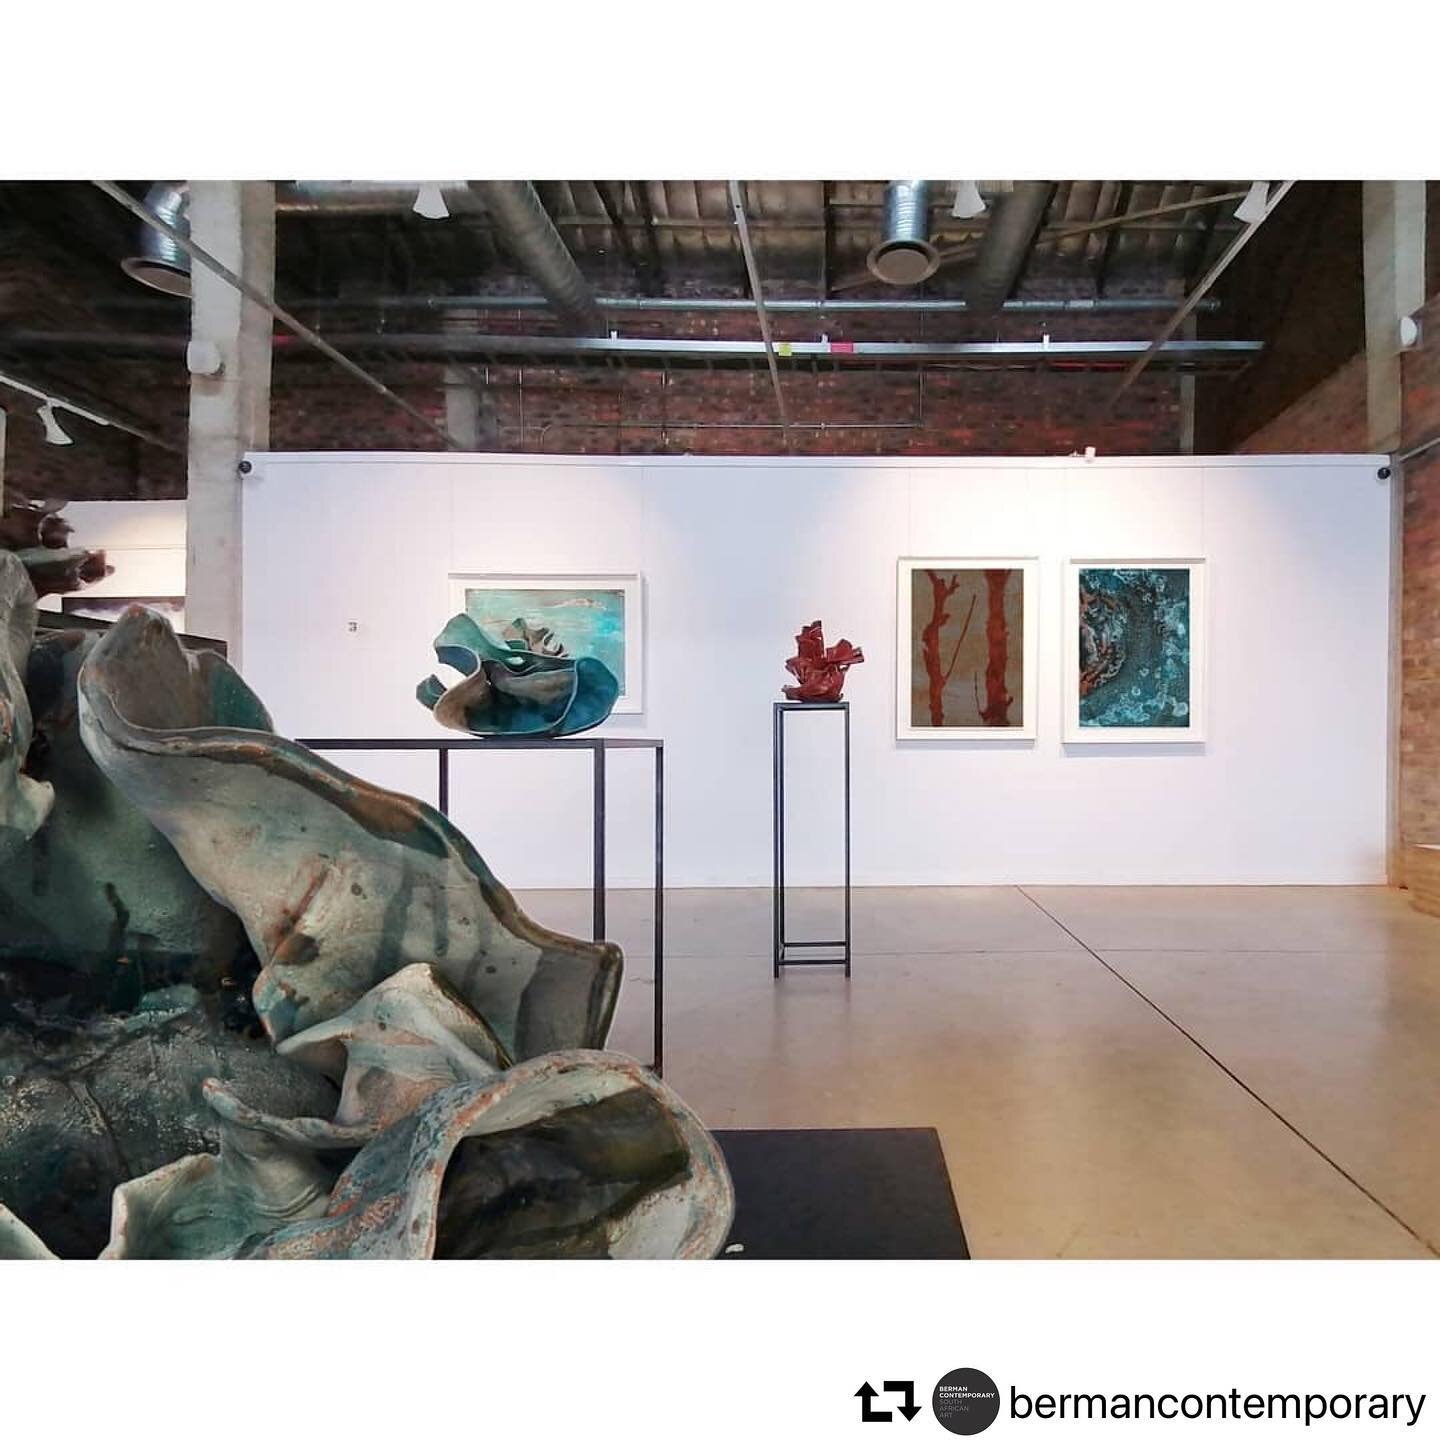 Thank you #bermancontemporary for featuring my work this week. #repost @bermancontemporary
・・・
With the gallery now open for 2021 and the continued uncertainty of the coming months, we have decided to extend our Summer Show until March. We will be us